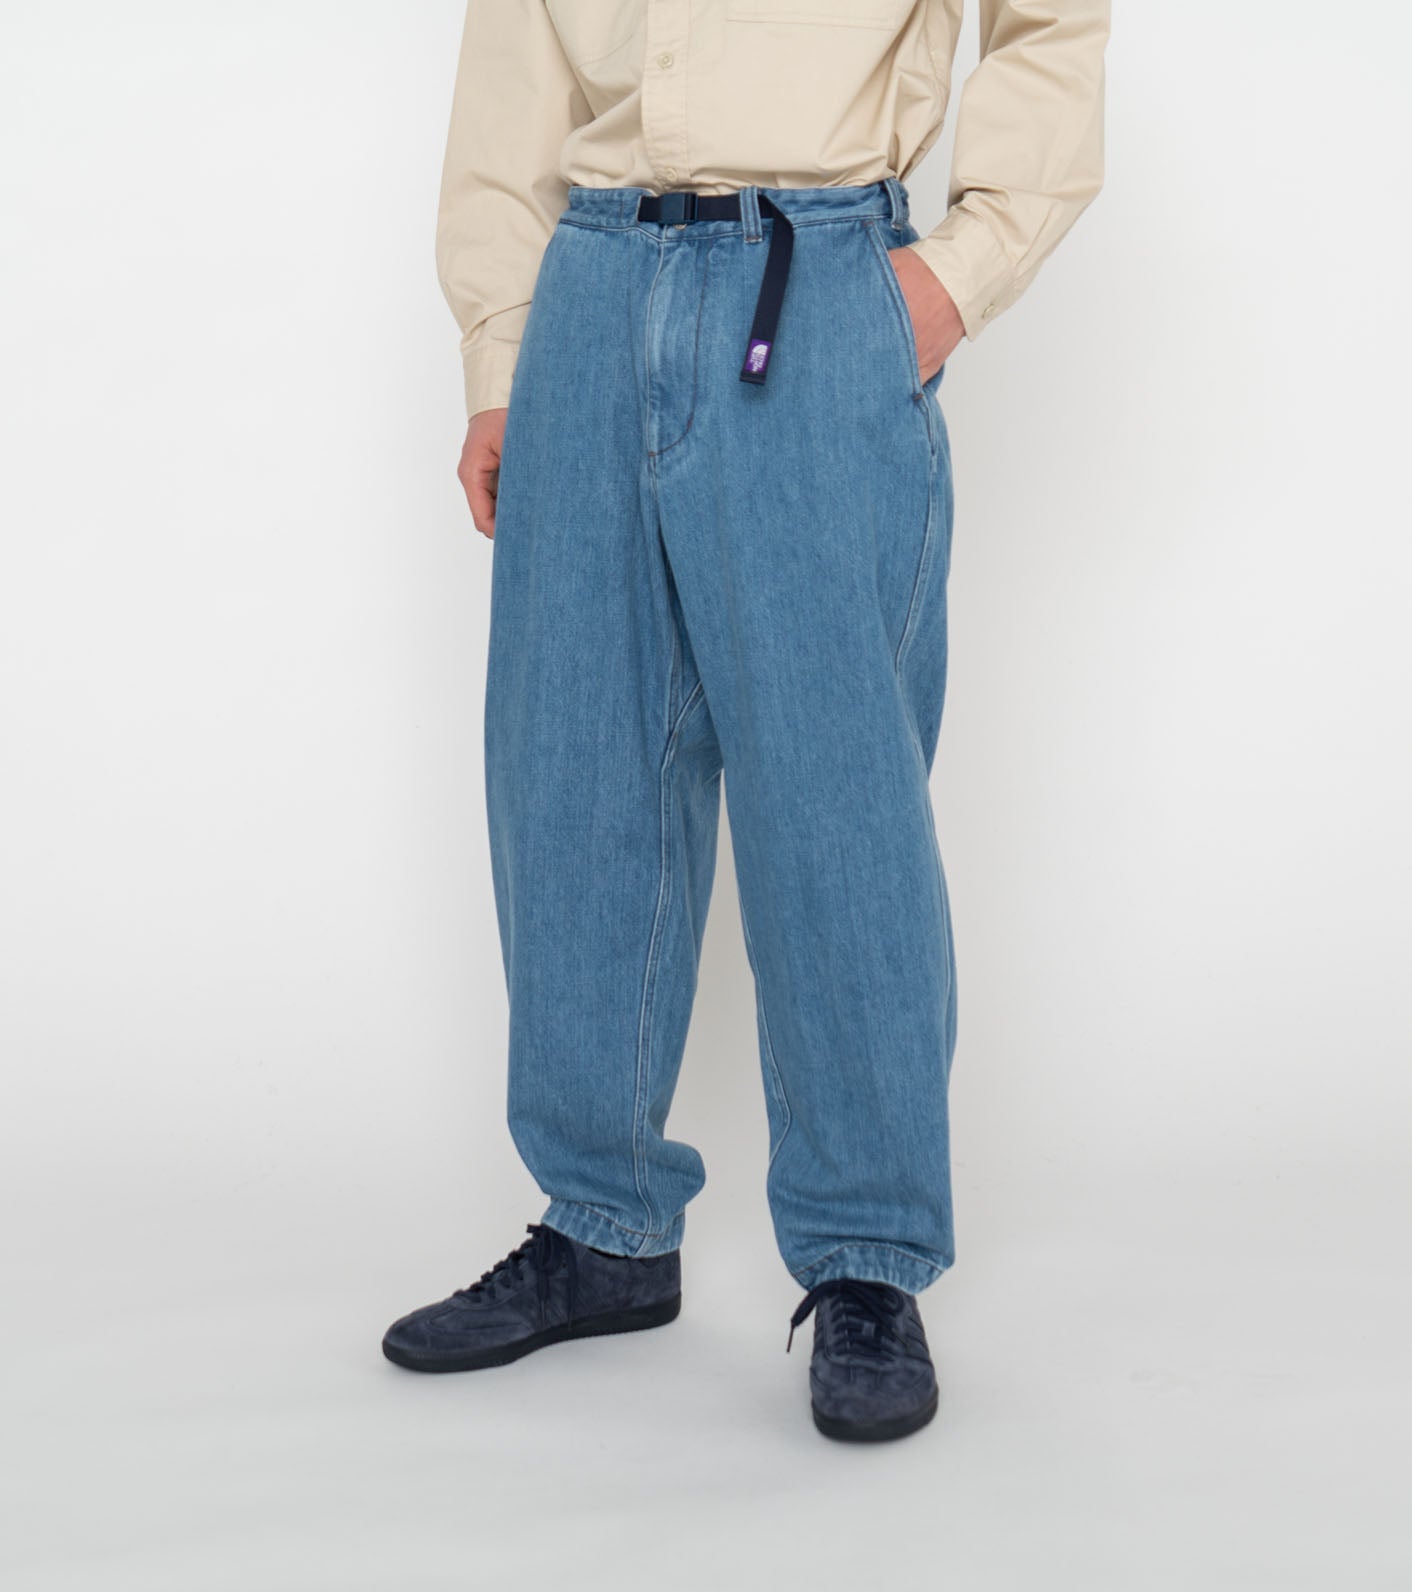 THE NORTH FACE PURPLE LABEL Denim Wide Tapered Field Pants 